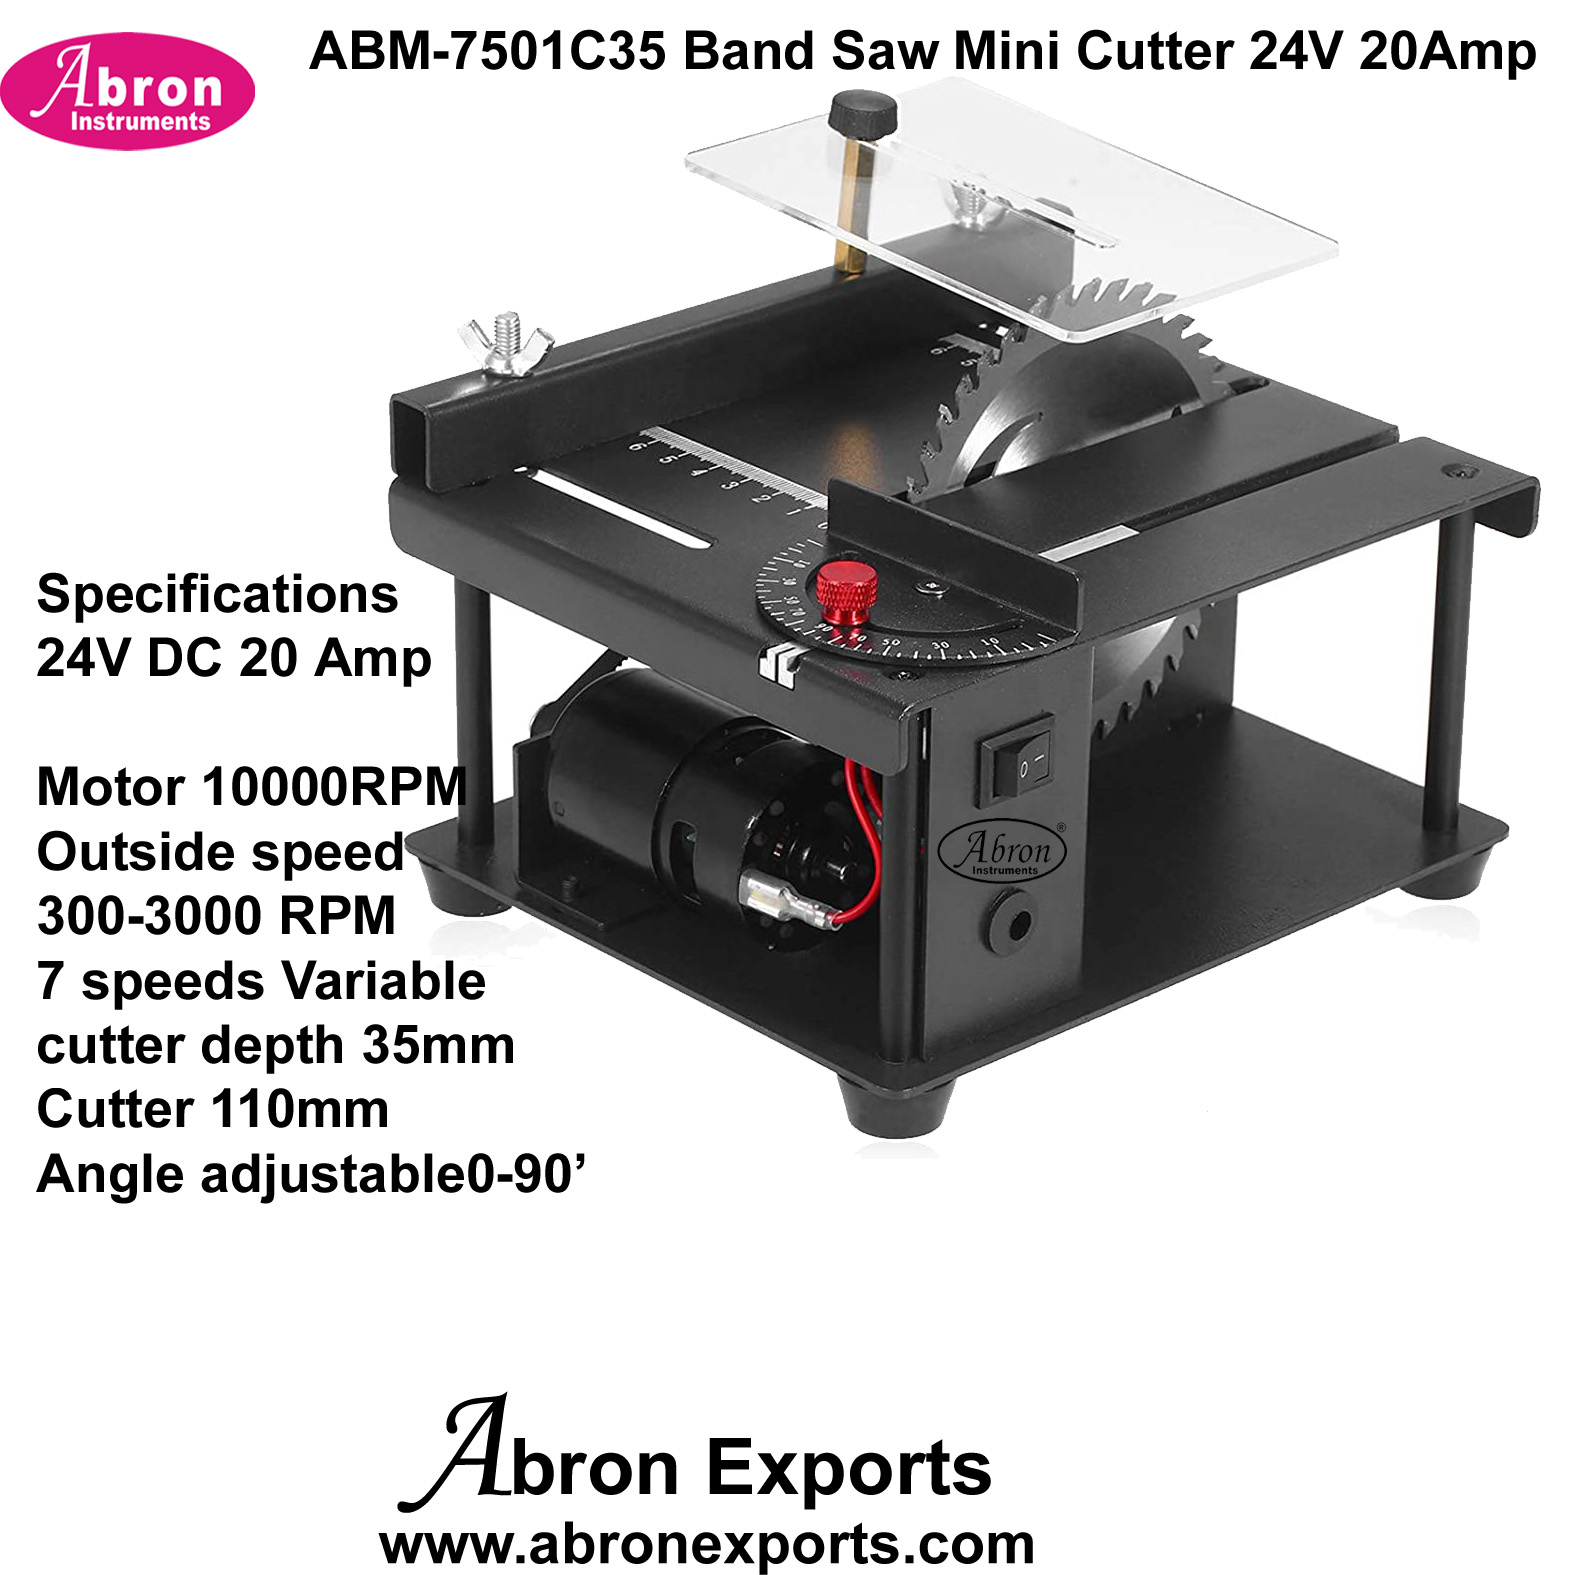 Band Saw Table Cutter Electric 24V 20A 10000 RPM Speed 35mm 110mm Blade Multi Functional Angle Adjustment Abron ABM-7501C35 